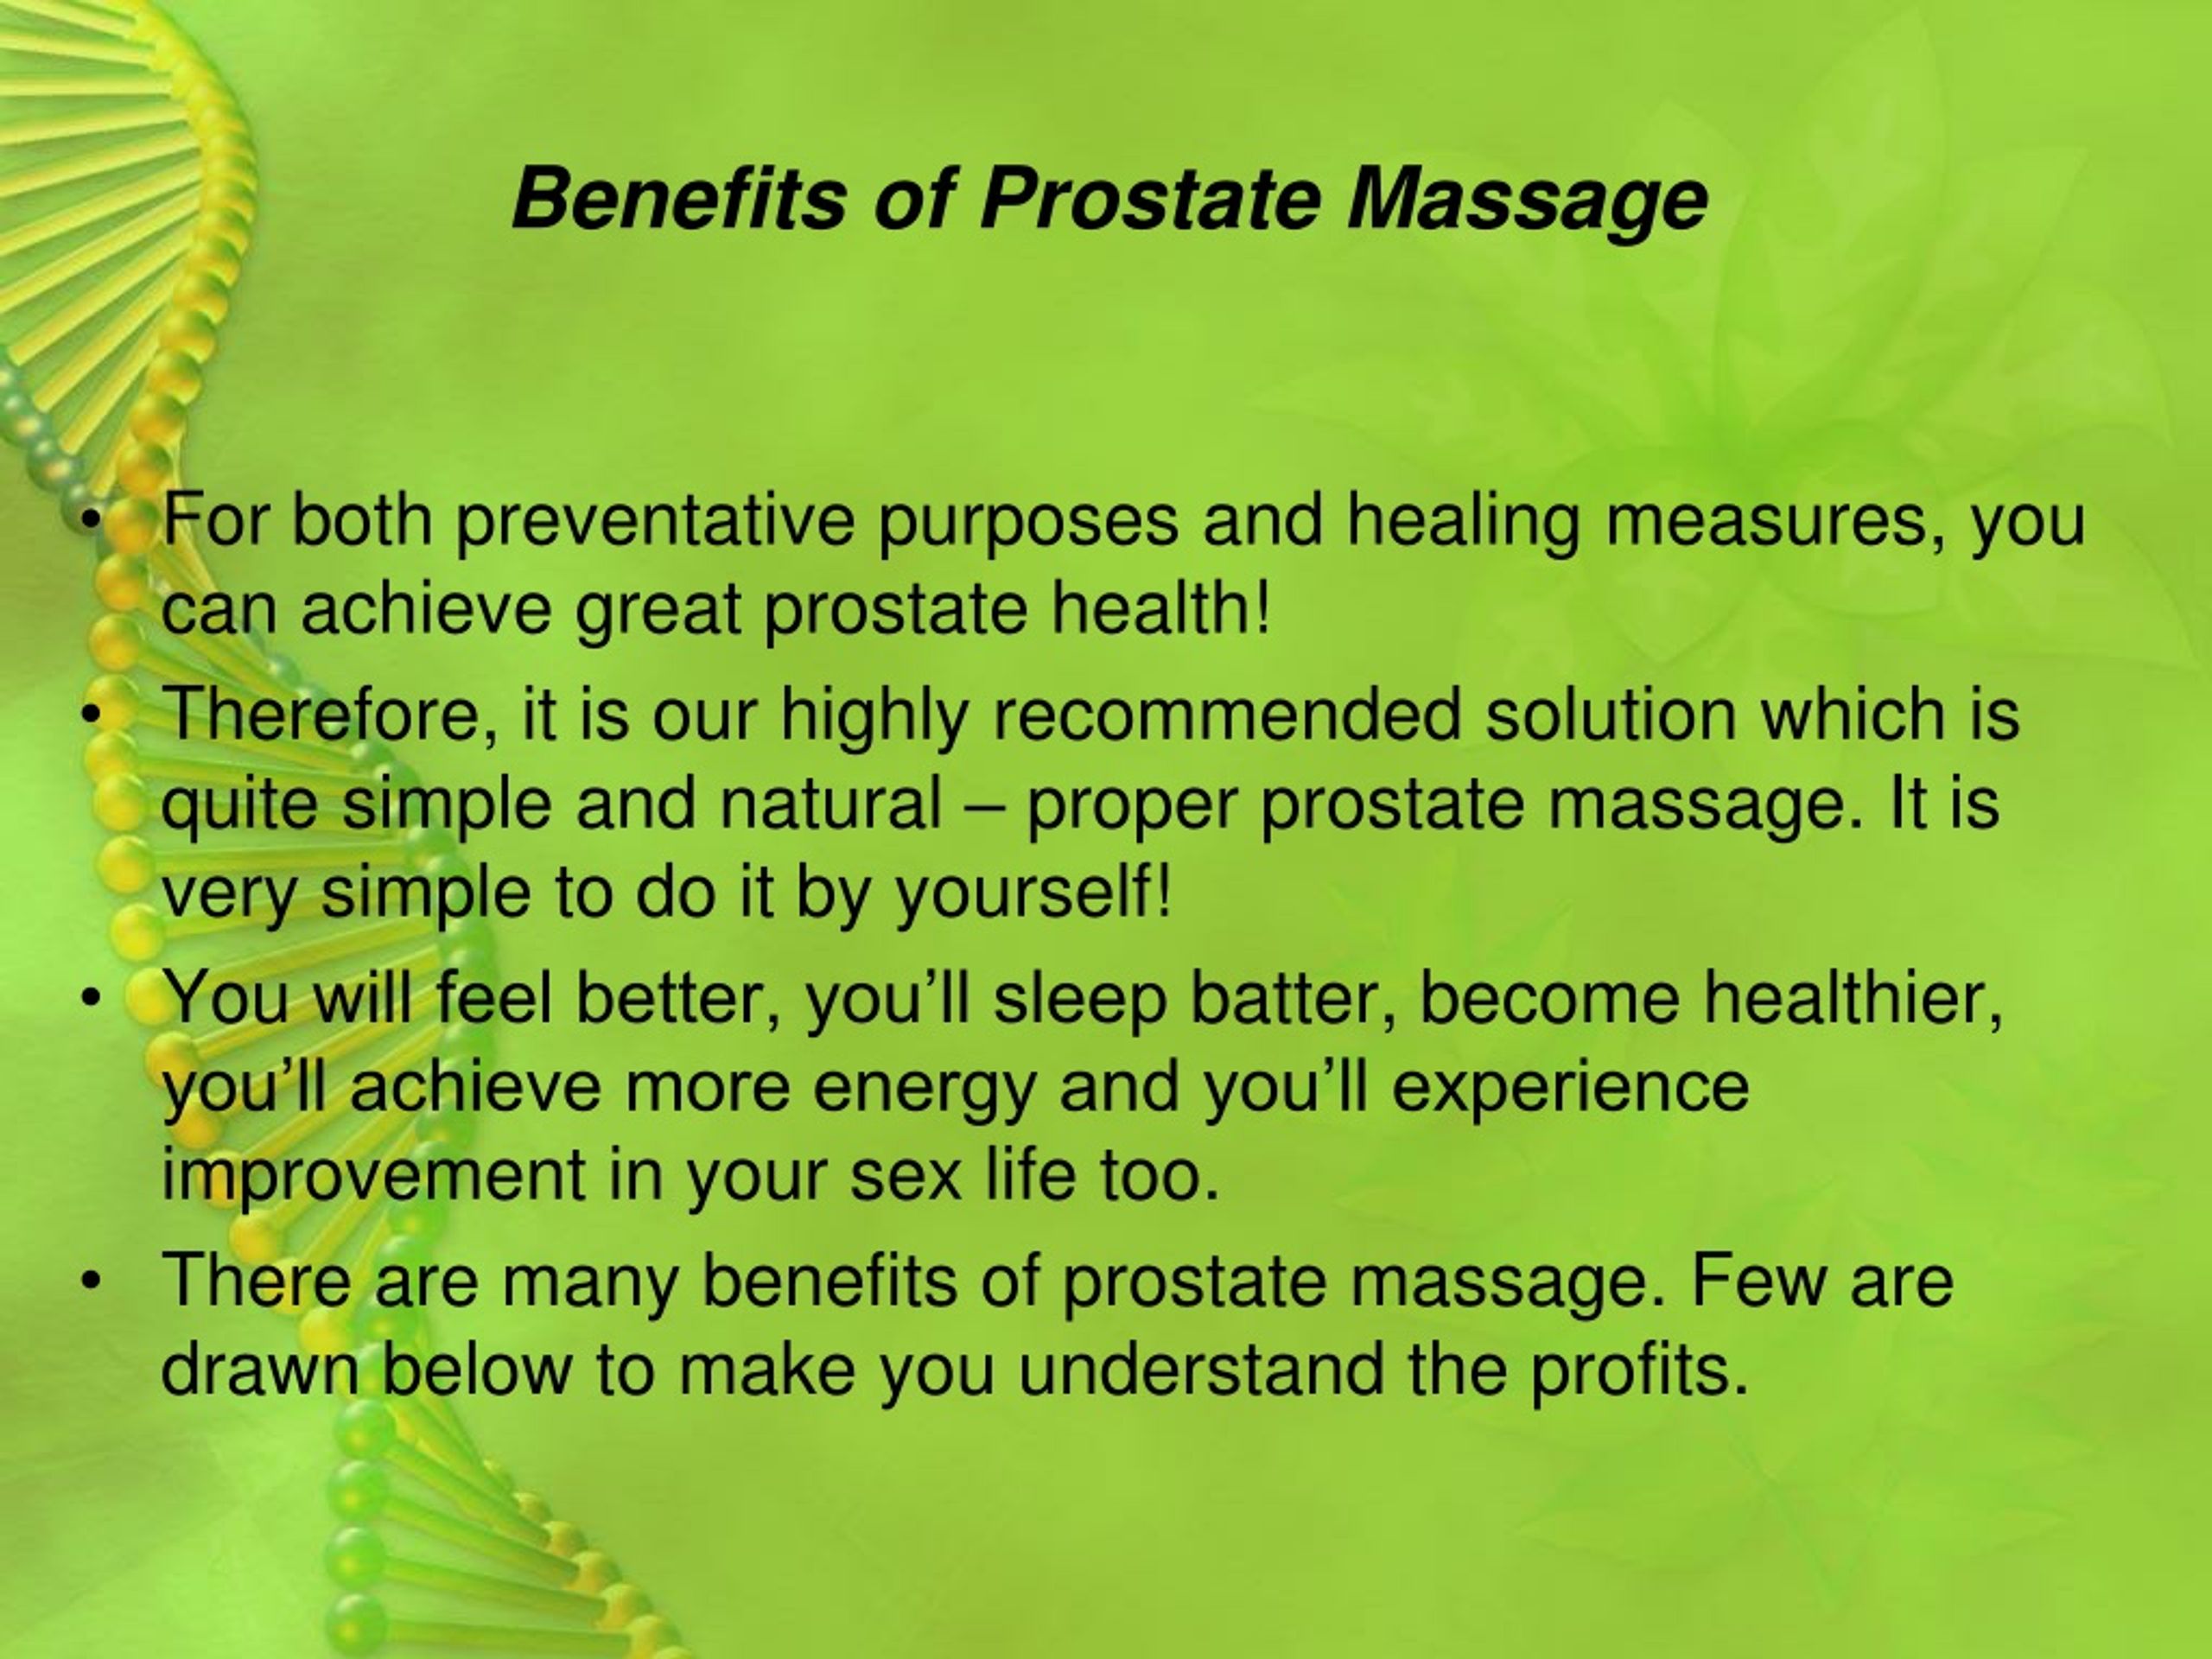 Can you massage your own prostate